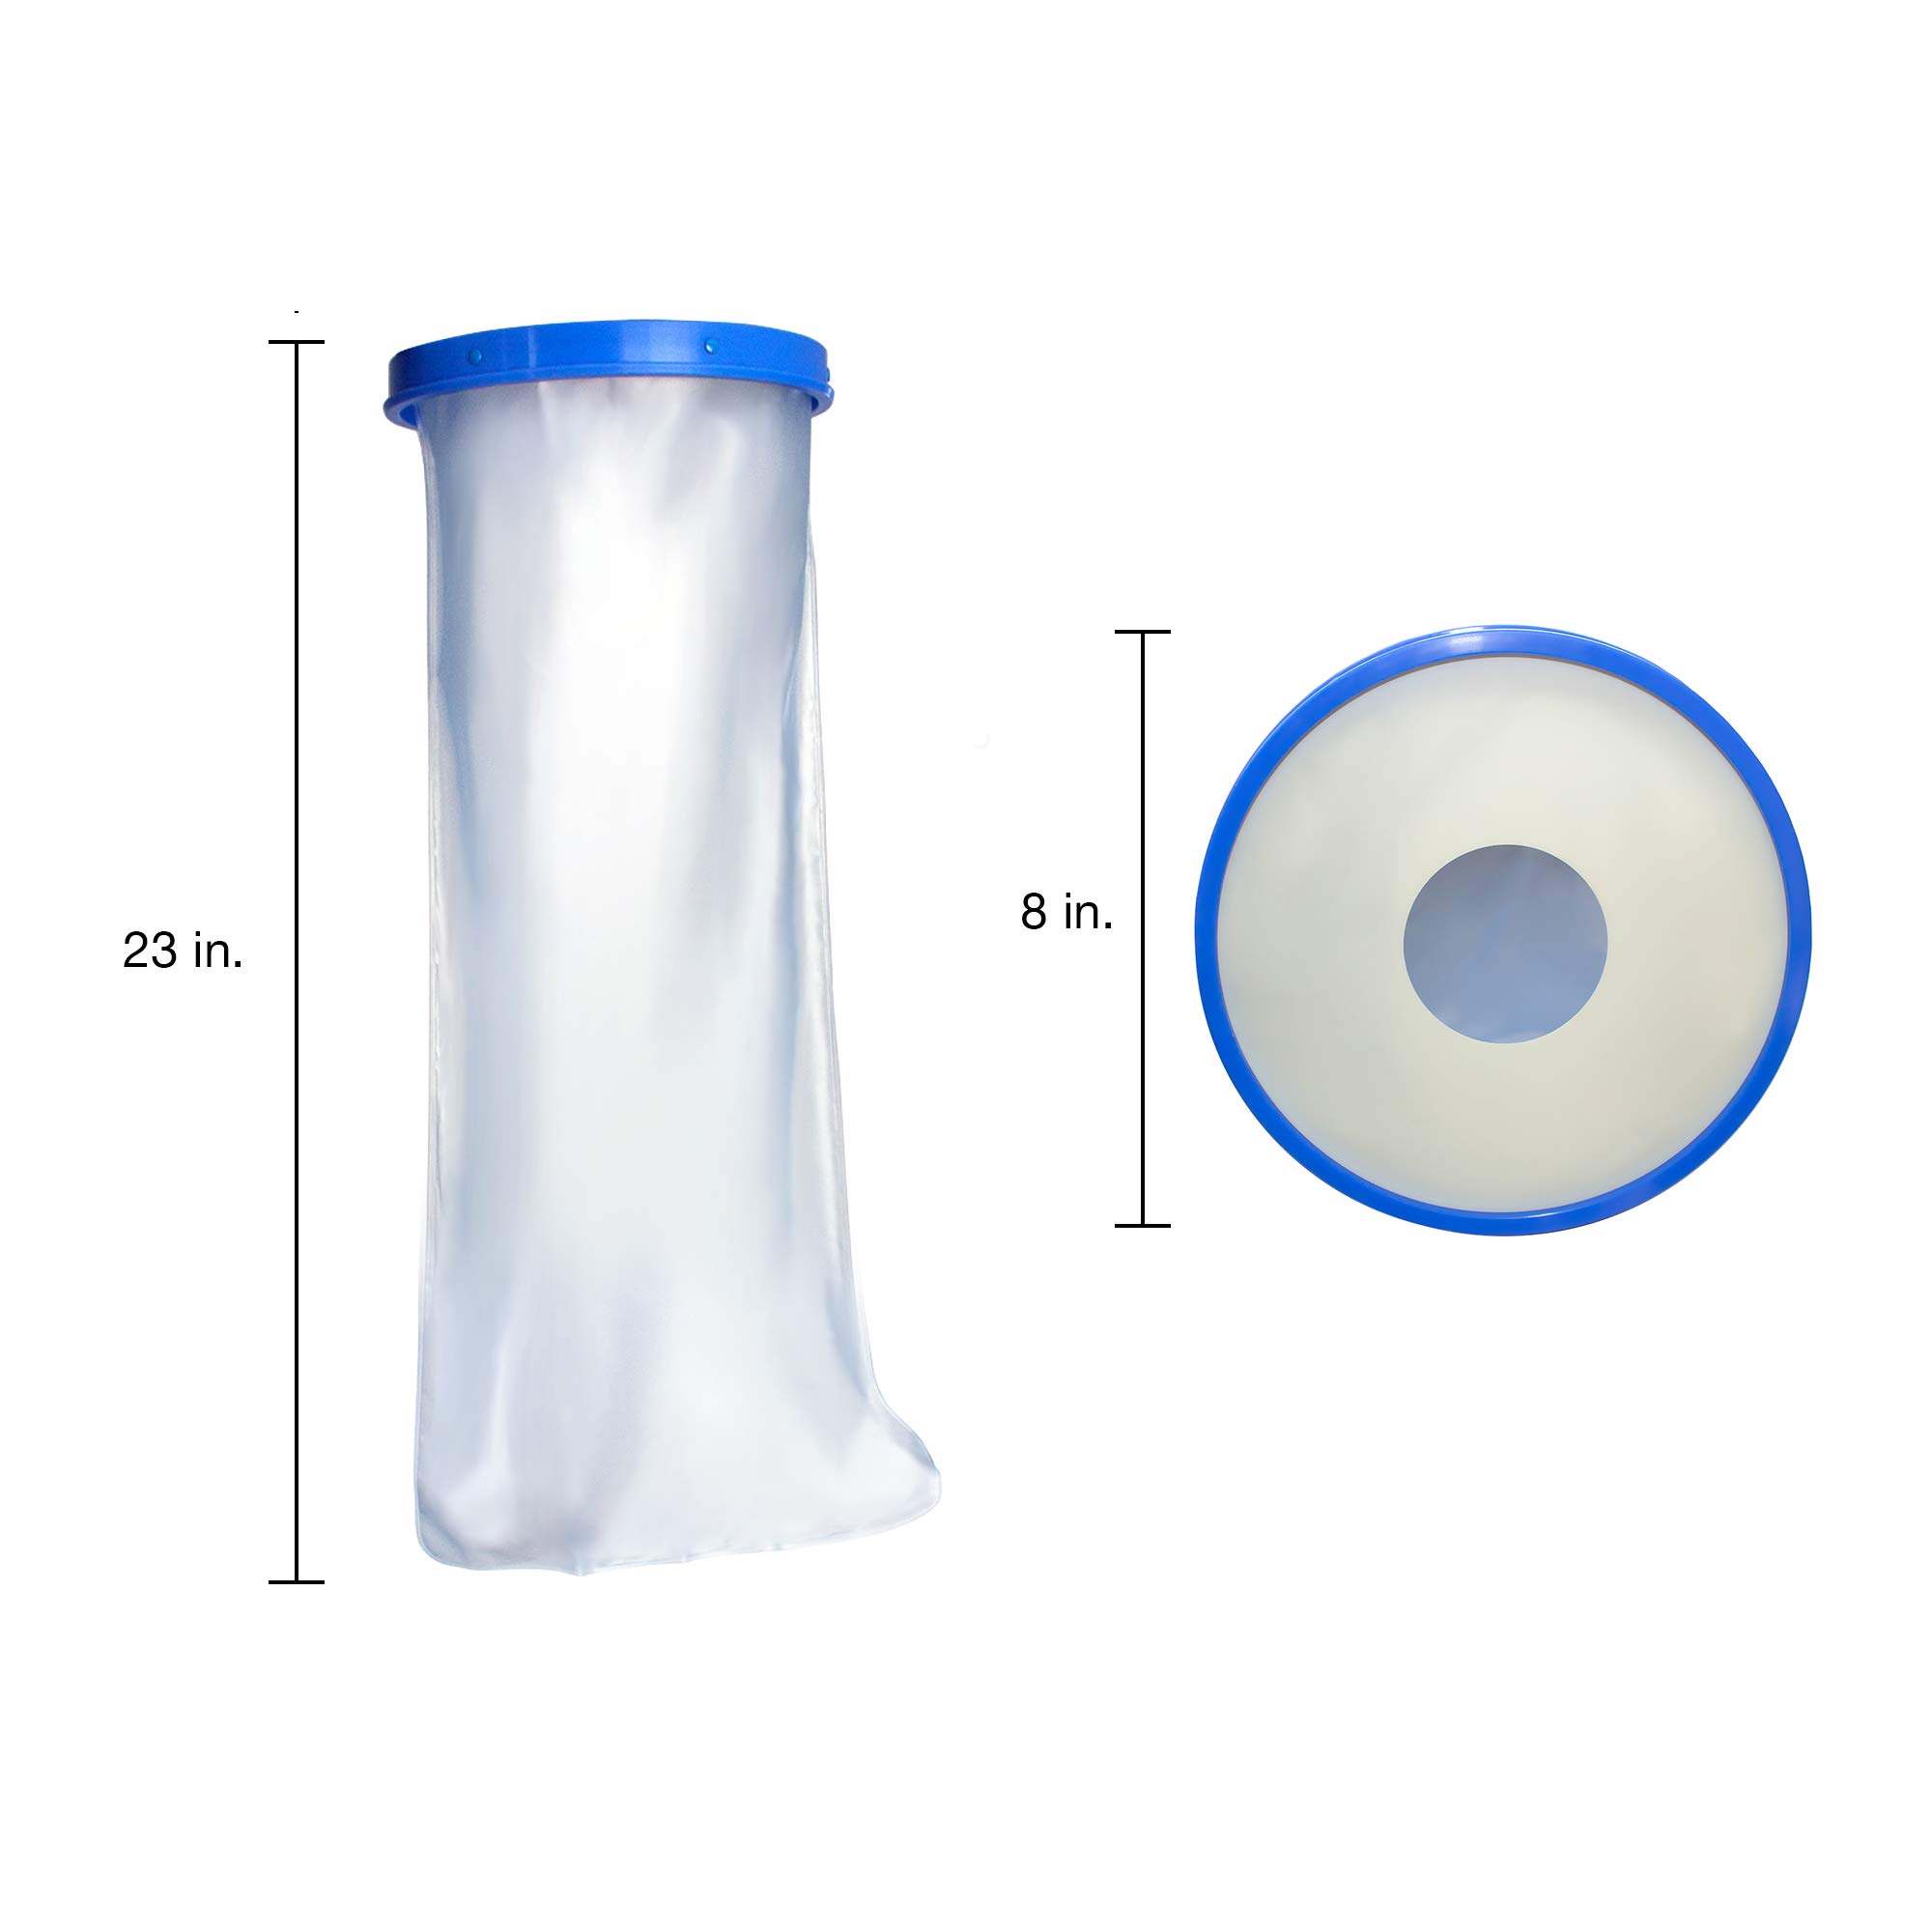 DMI Waterproof Cast Cover Wound Barrier and Bandage Protector Reusable with a Watertight Seal for Showers Baths & Pools Fits Adult Small Leg up to 23 Inches in Length, Short Leg